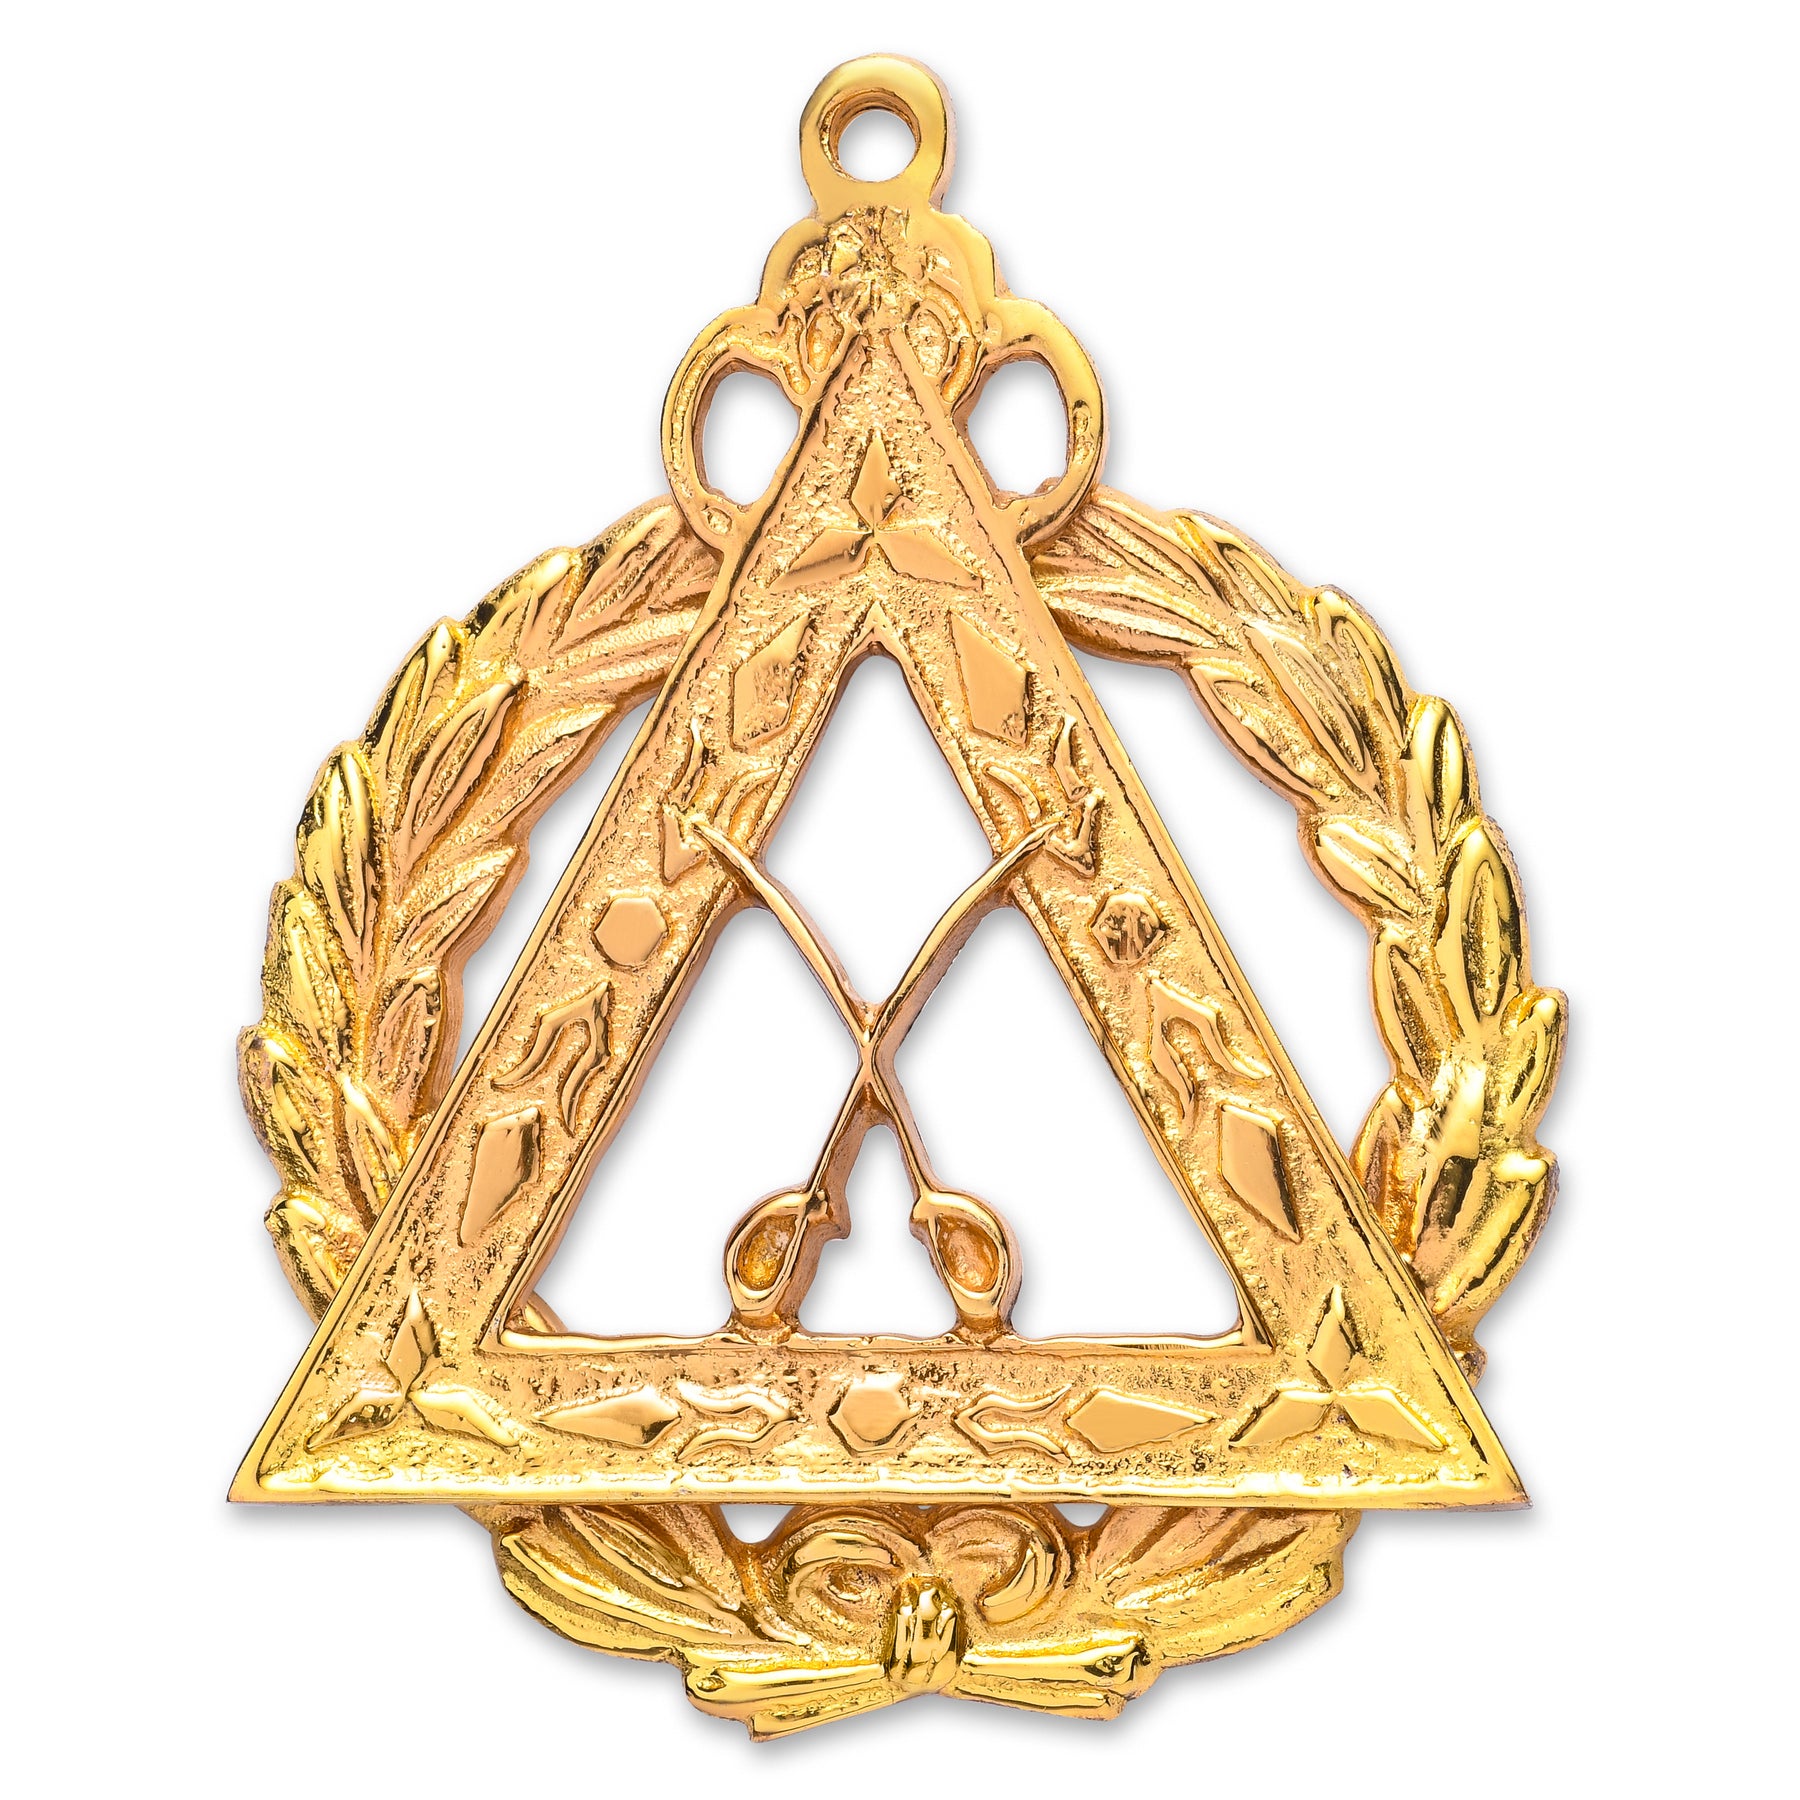 Grand Captain Royal Arch Chapter Officer Collar Jewel - Gold Plated - Bricks Masons